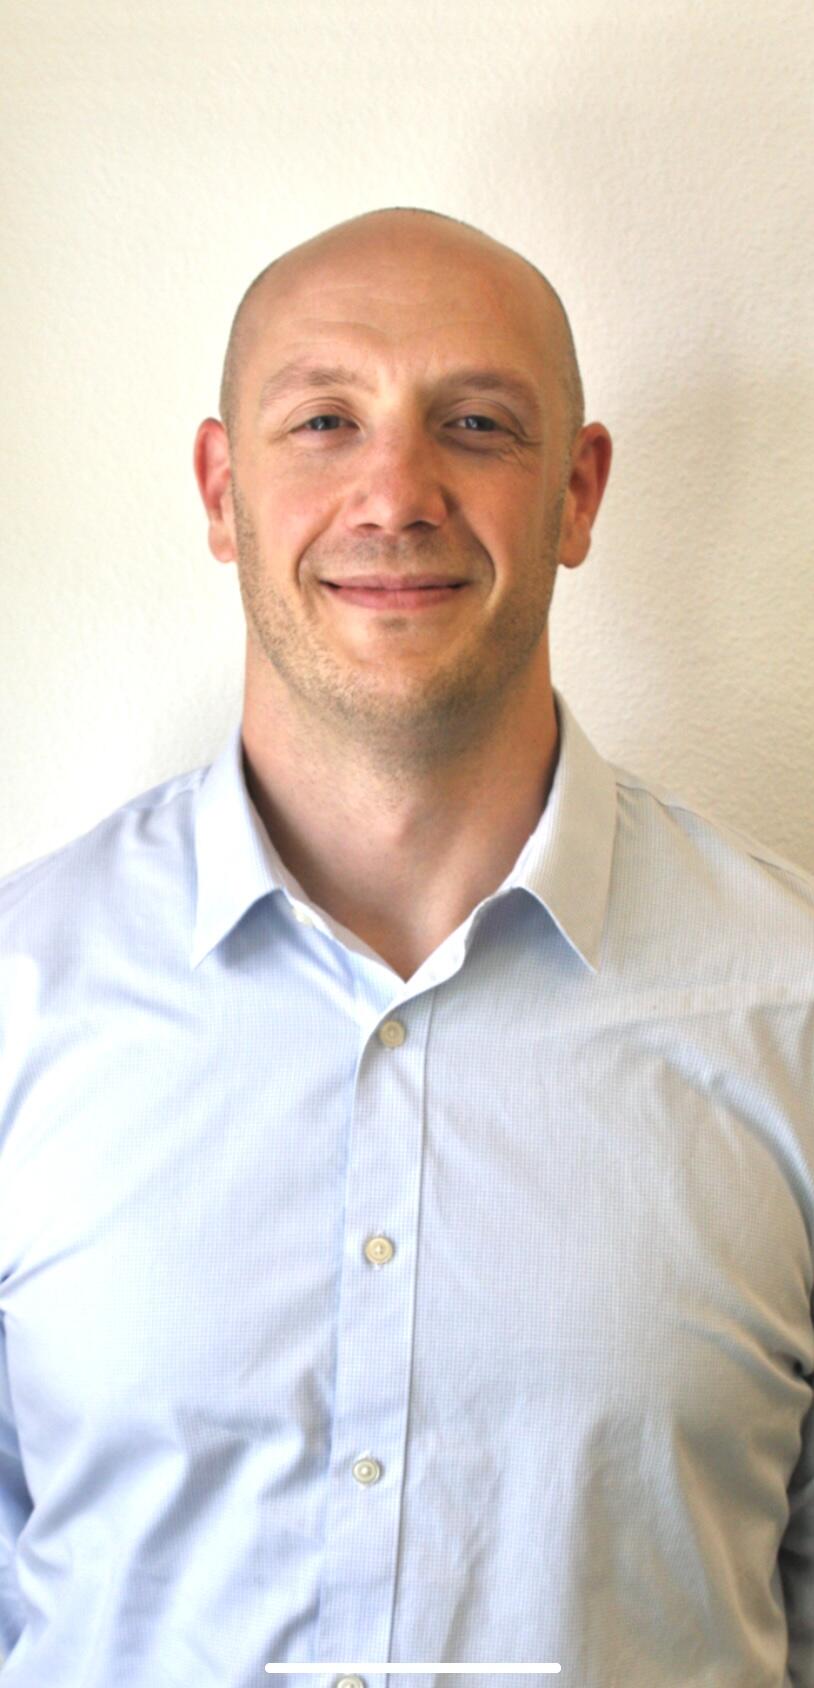 Nick Haley, 37, director of operations, Boys & Girls Clubs of St. Helena and Calistoga, St. Helena, is a North Bay Business Journal 2021 Forty Under 40 winner.